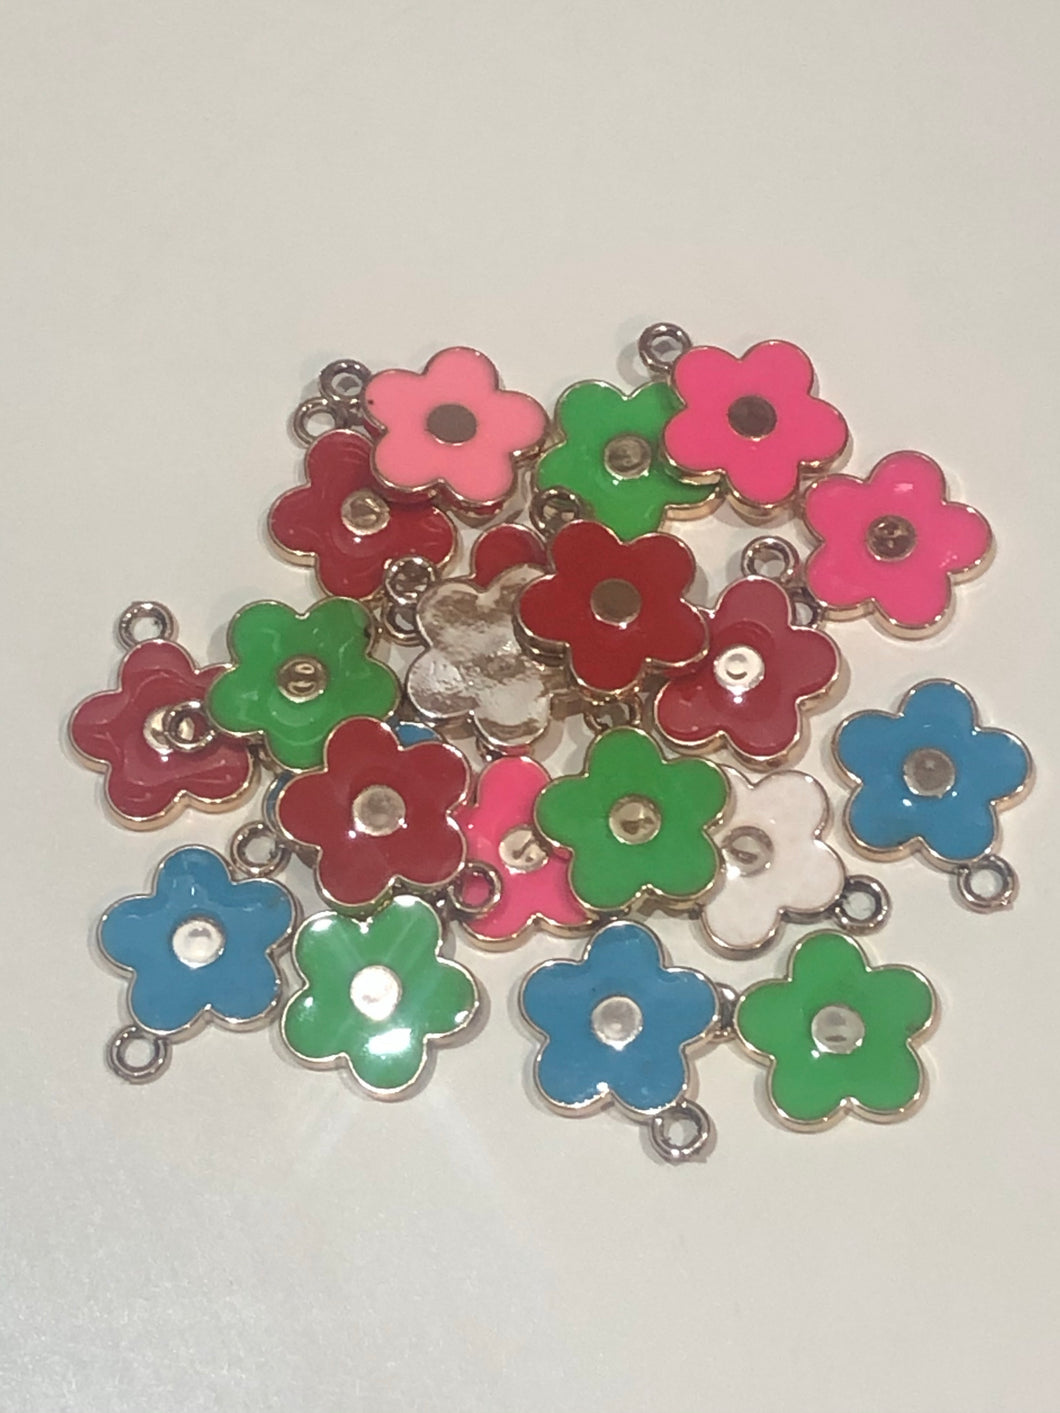 Flower charms